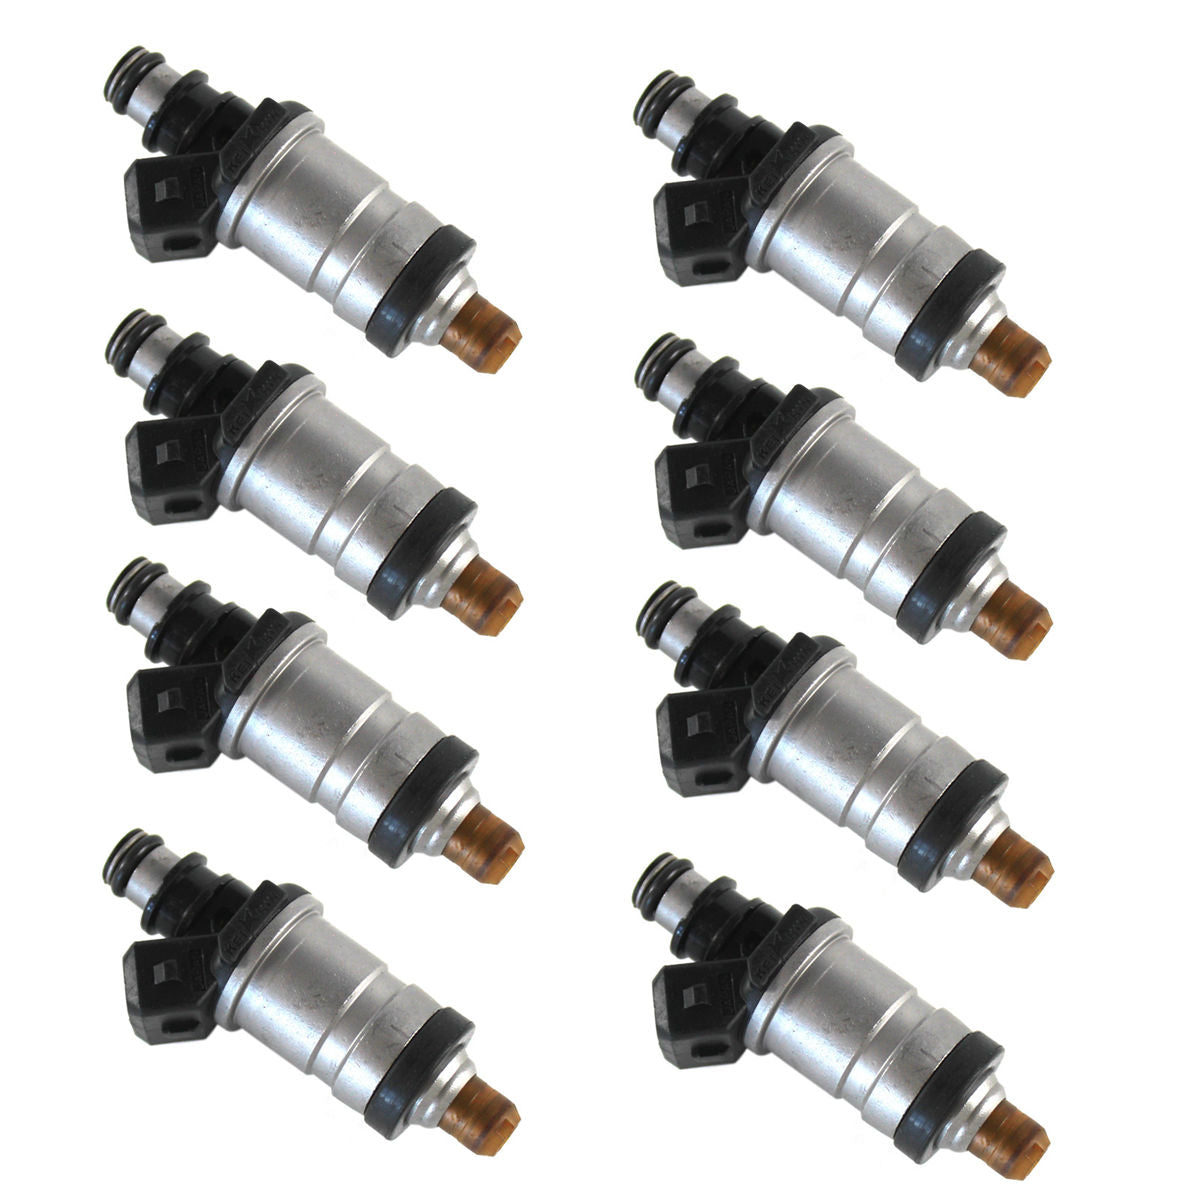 8 Pcs Fuel Injector 18715T1 805225A1 for Mercury Outboard 150 thru 300HP - Sinocmp